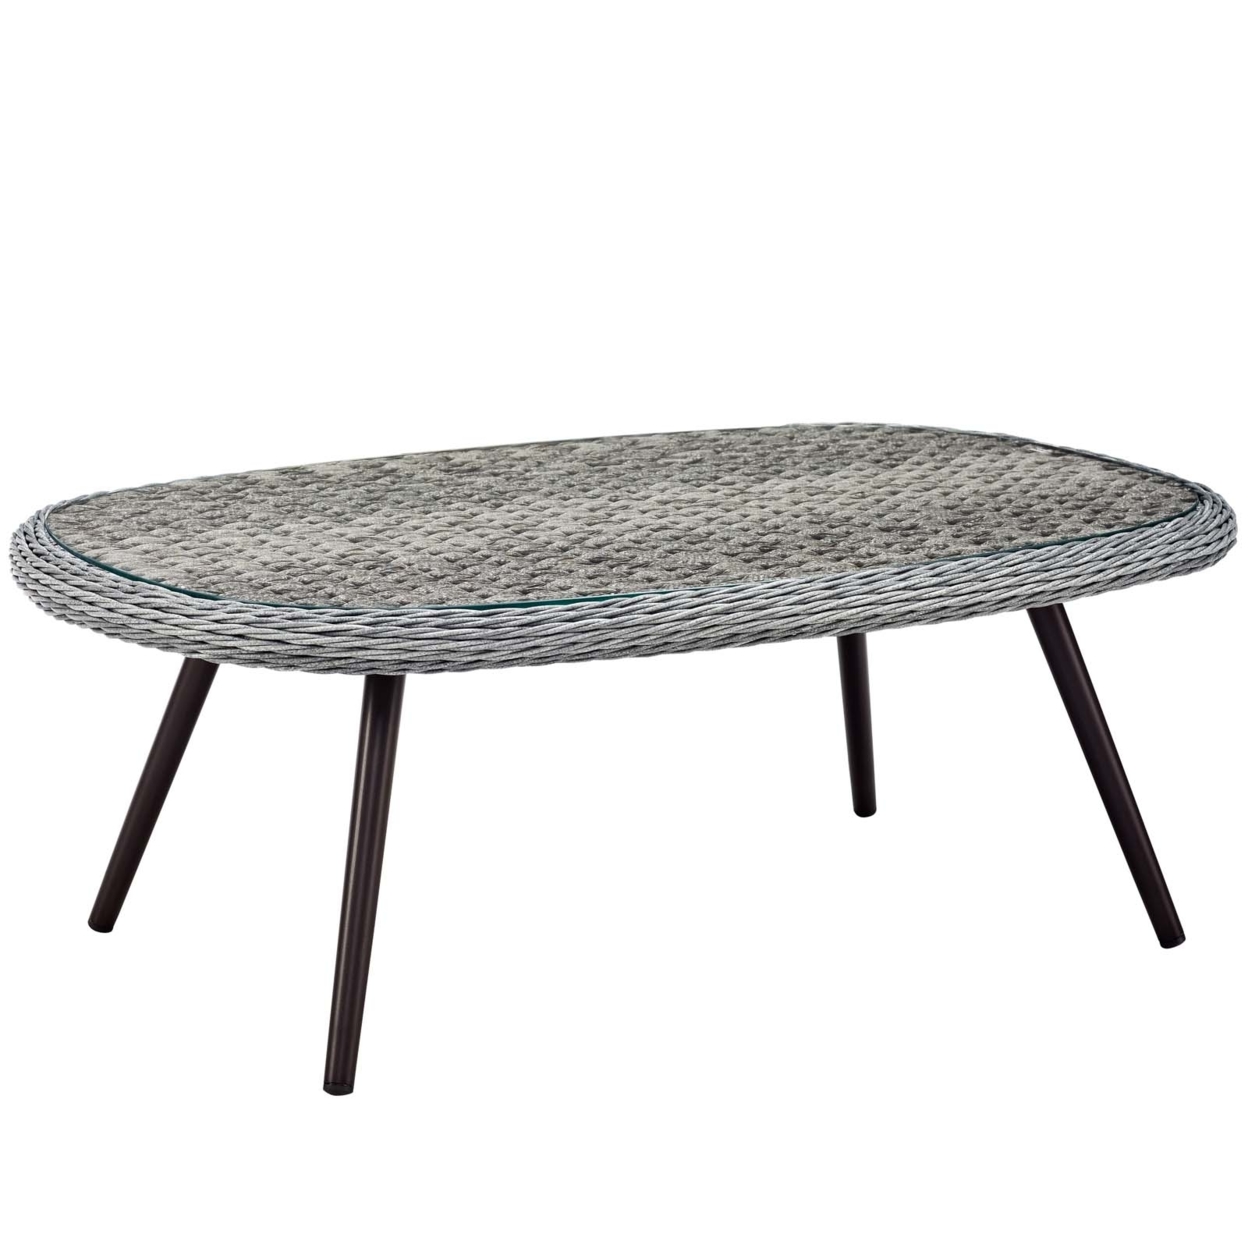 Endeavor Outdoor Patio Wicker Rattan Coffee Table (3026-GRY) - image 1 of 6